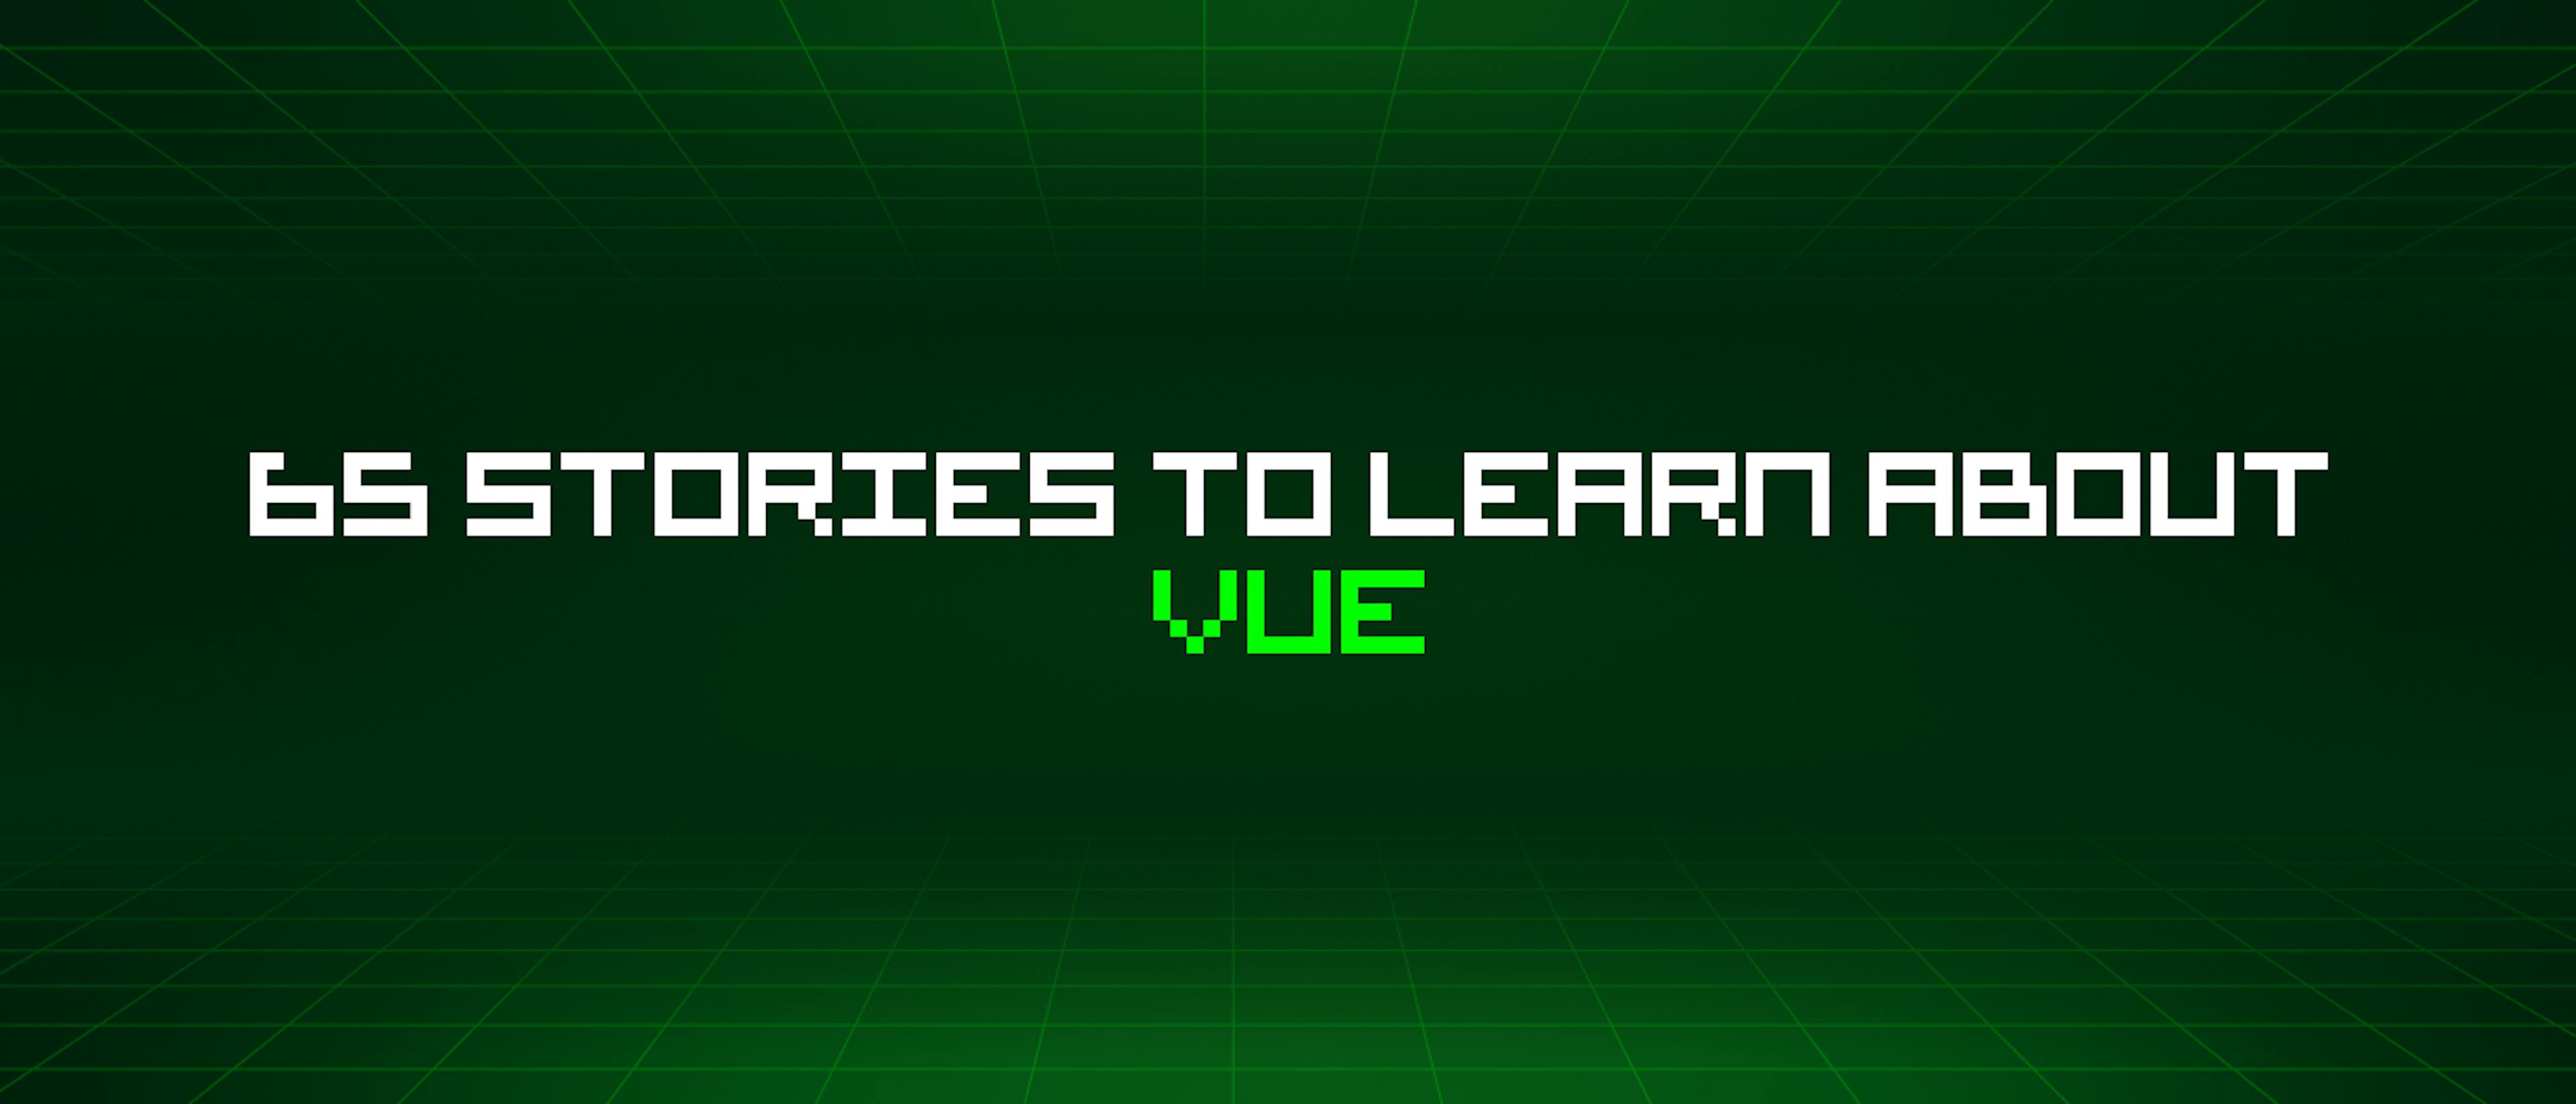 featured image - 65 Stories To Learn About Vue